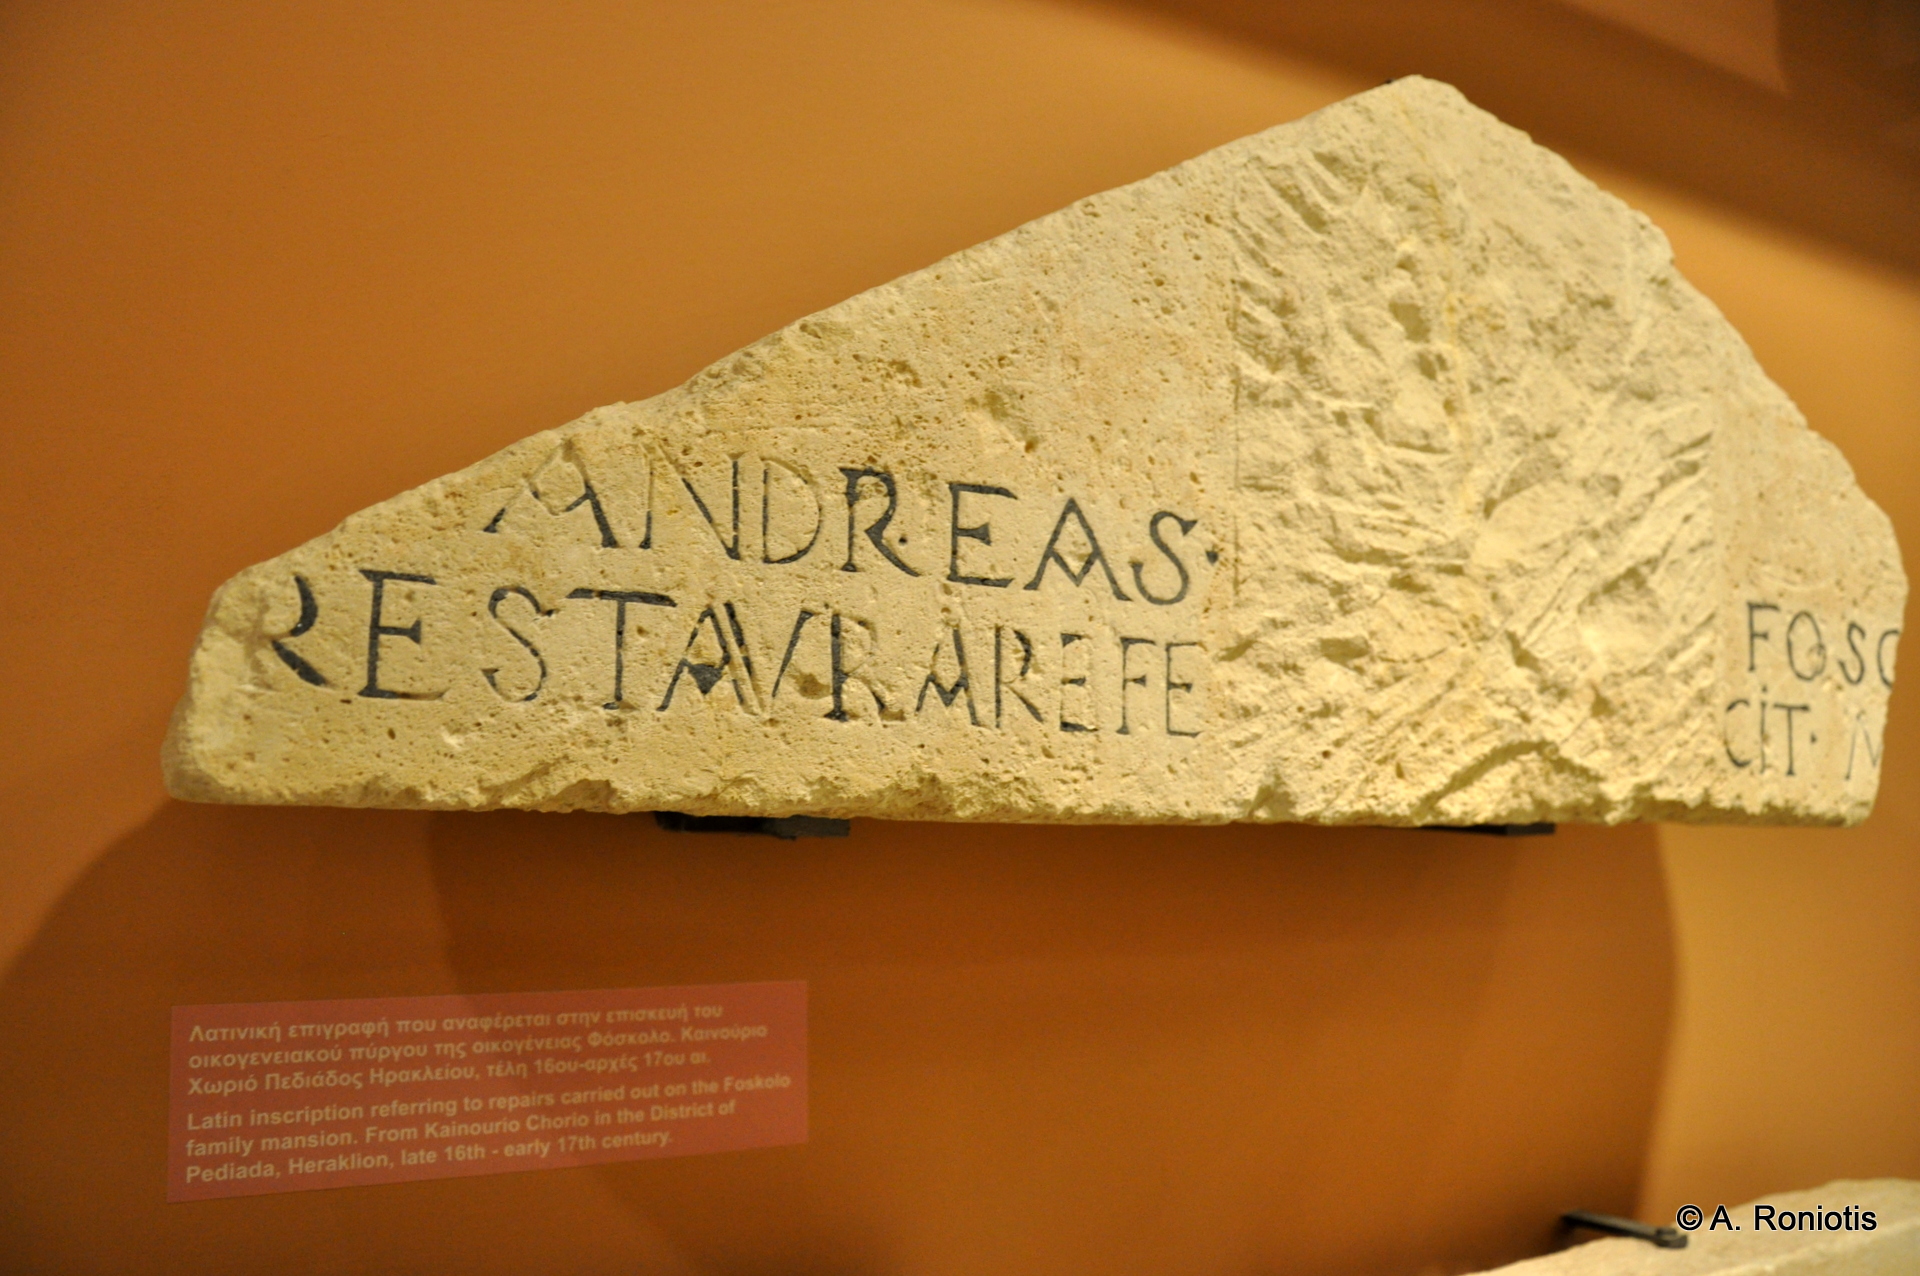 Latin inscription mentioning restoration of Foscolo chateau (17th cent) - Historical Museum of Crete